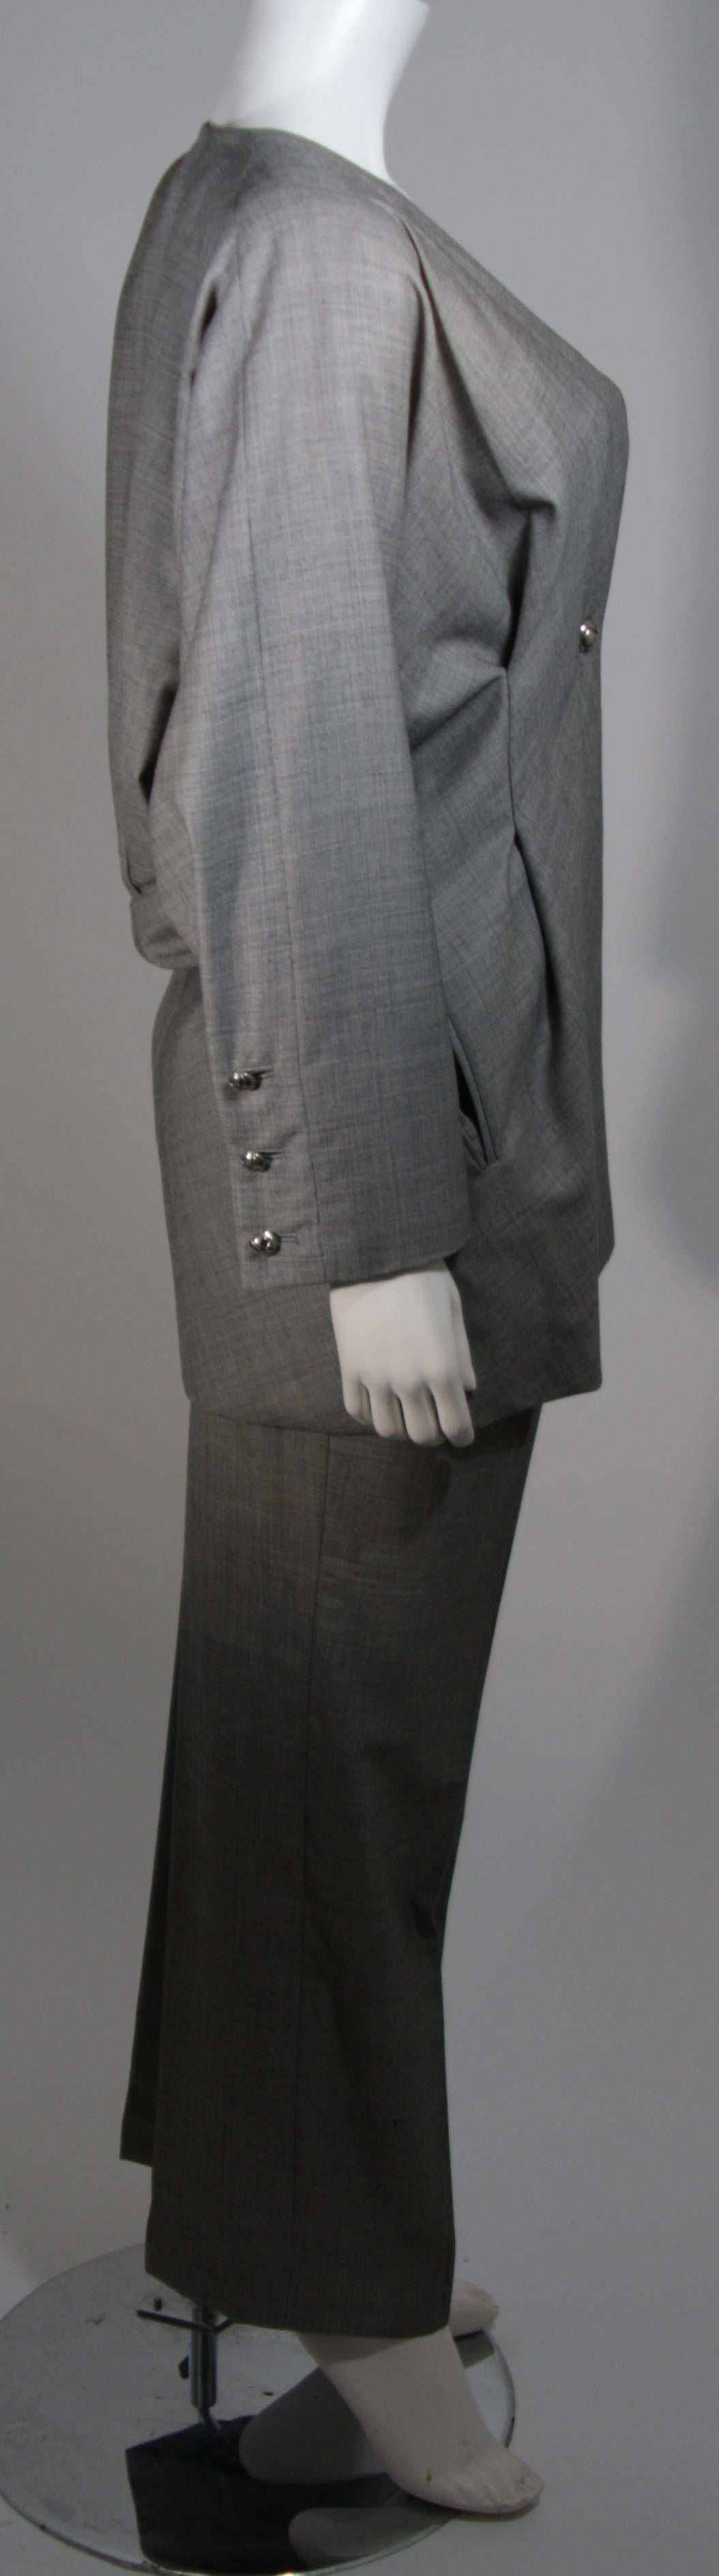 Galanos Couture Abstract Grey Wool Suit Size 2 4 6 1